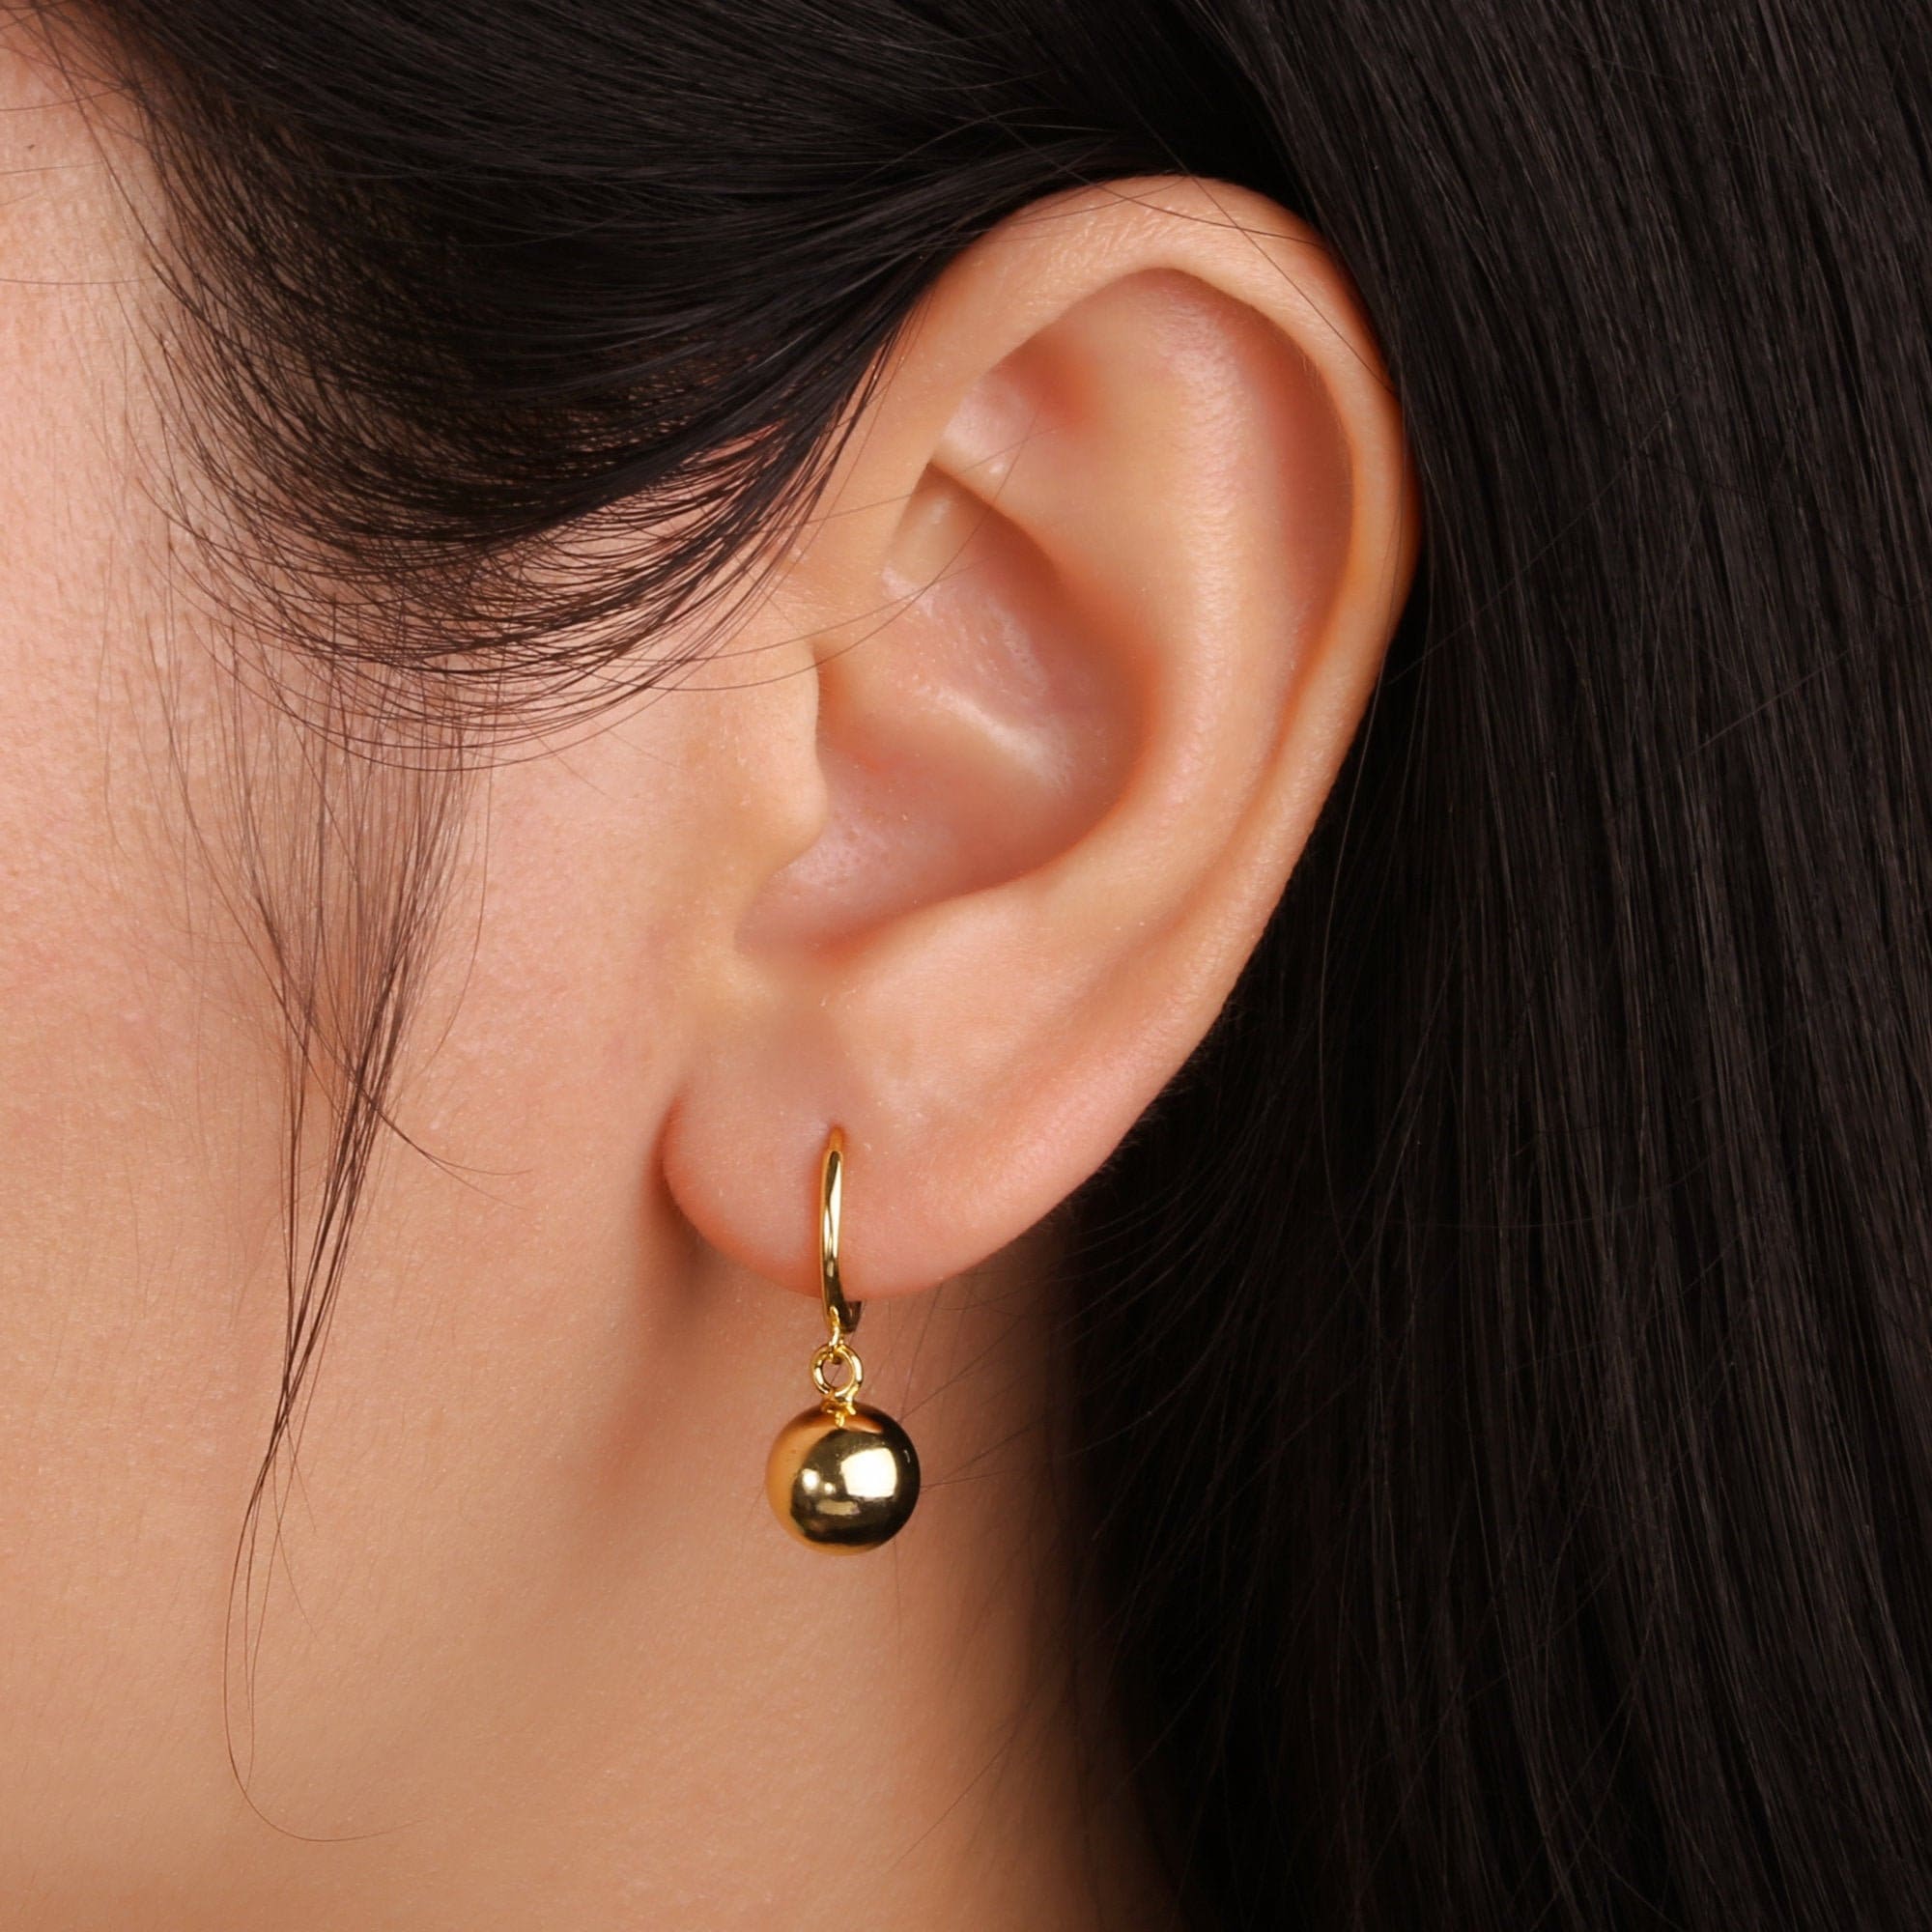 Classic Ball Earrings  Gold Filled  H Studio Jewelry